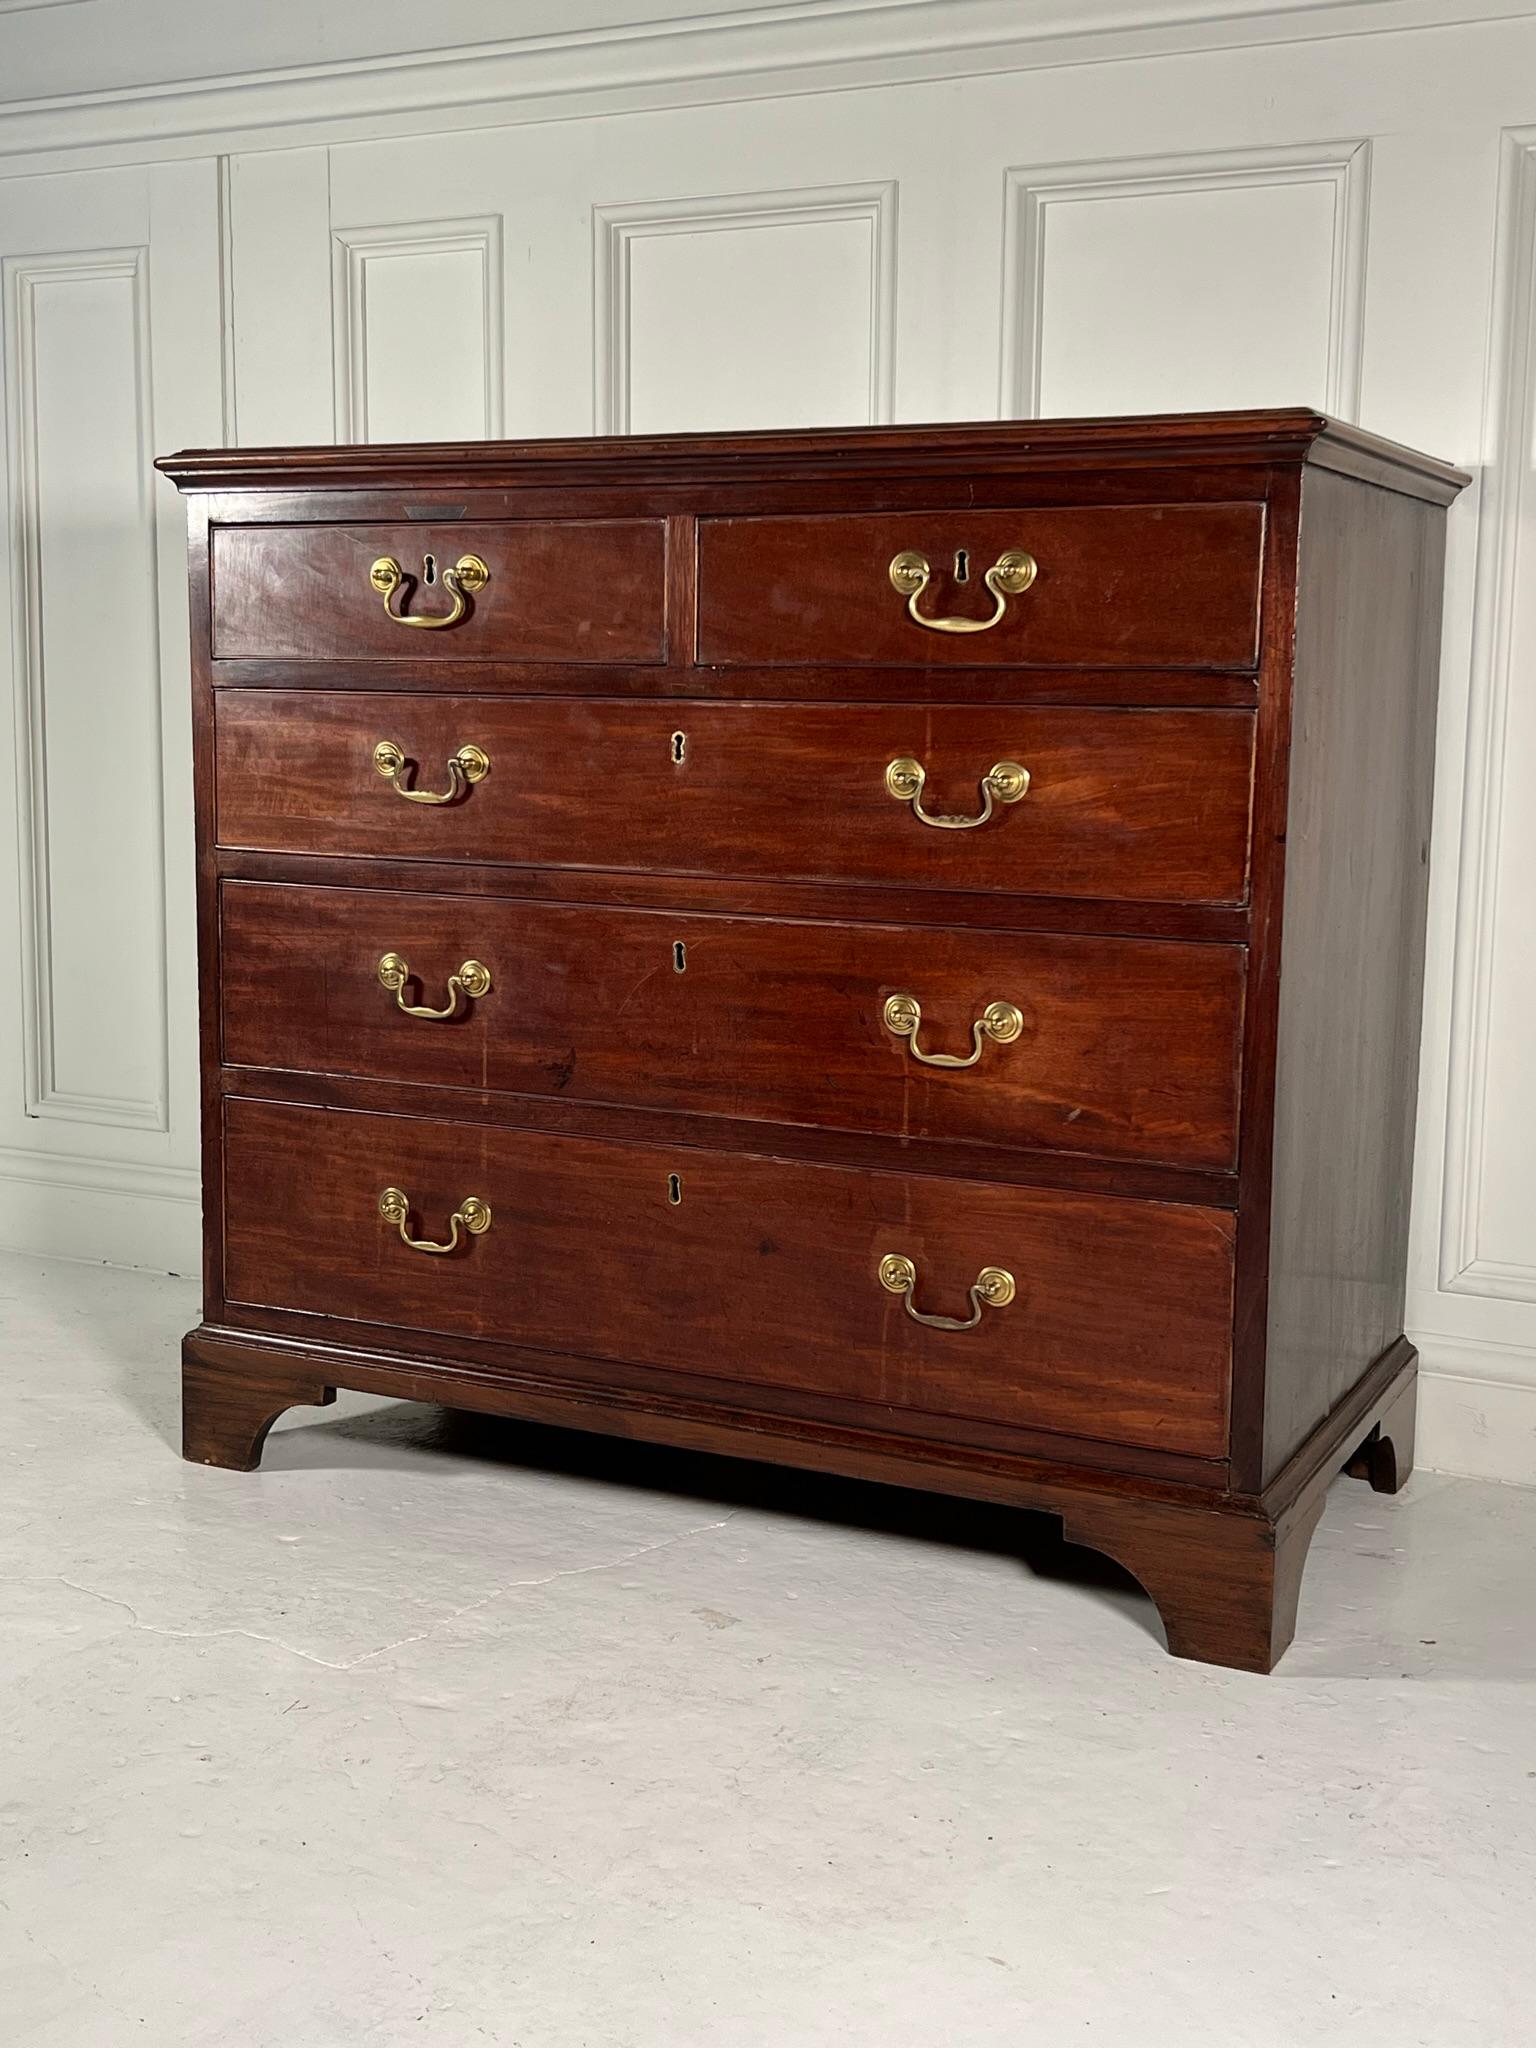 Mahogany Late 19th Century Georgian Revival Chest of Drawers For Sale